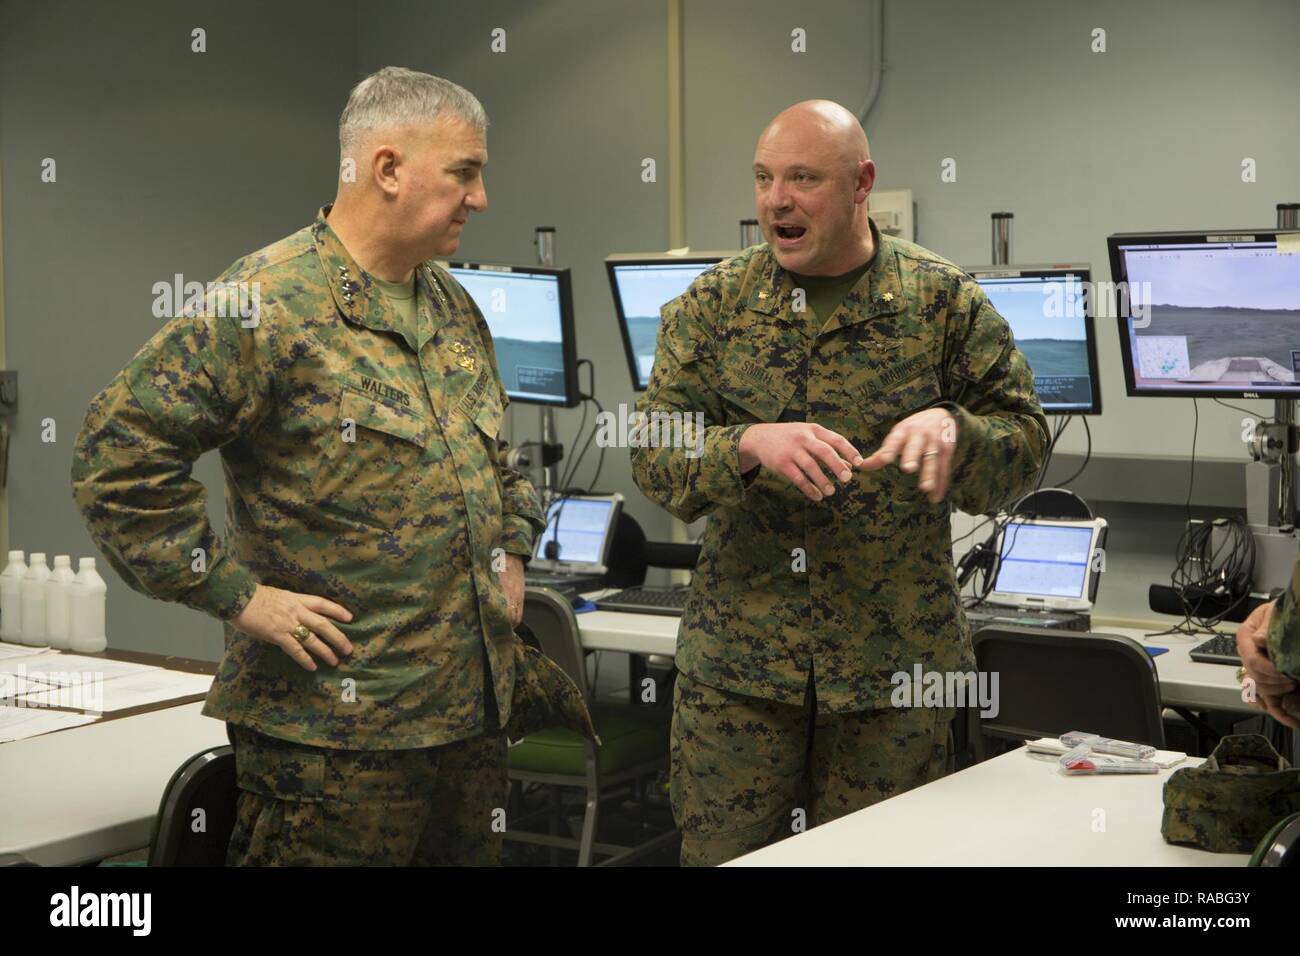 U.S. Marine Corps Maj. Craig L. Smith, right, modeling and simulation officer, II Marine Expeditionary Force (II MEF), briefs Gen. Glenn Walters, Assistant Commandant of the Marine Corps, on the usage of the II MEF Simulation Center during a visit to Camp Lejeune, N.C., Jan. 26, 2017. The purpose of the visit was to increase awareness and capabilities of ground simulation and simulator training systems in support of operational forces combat readiness. Stock Photo